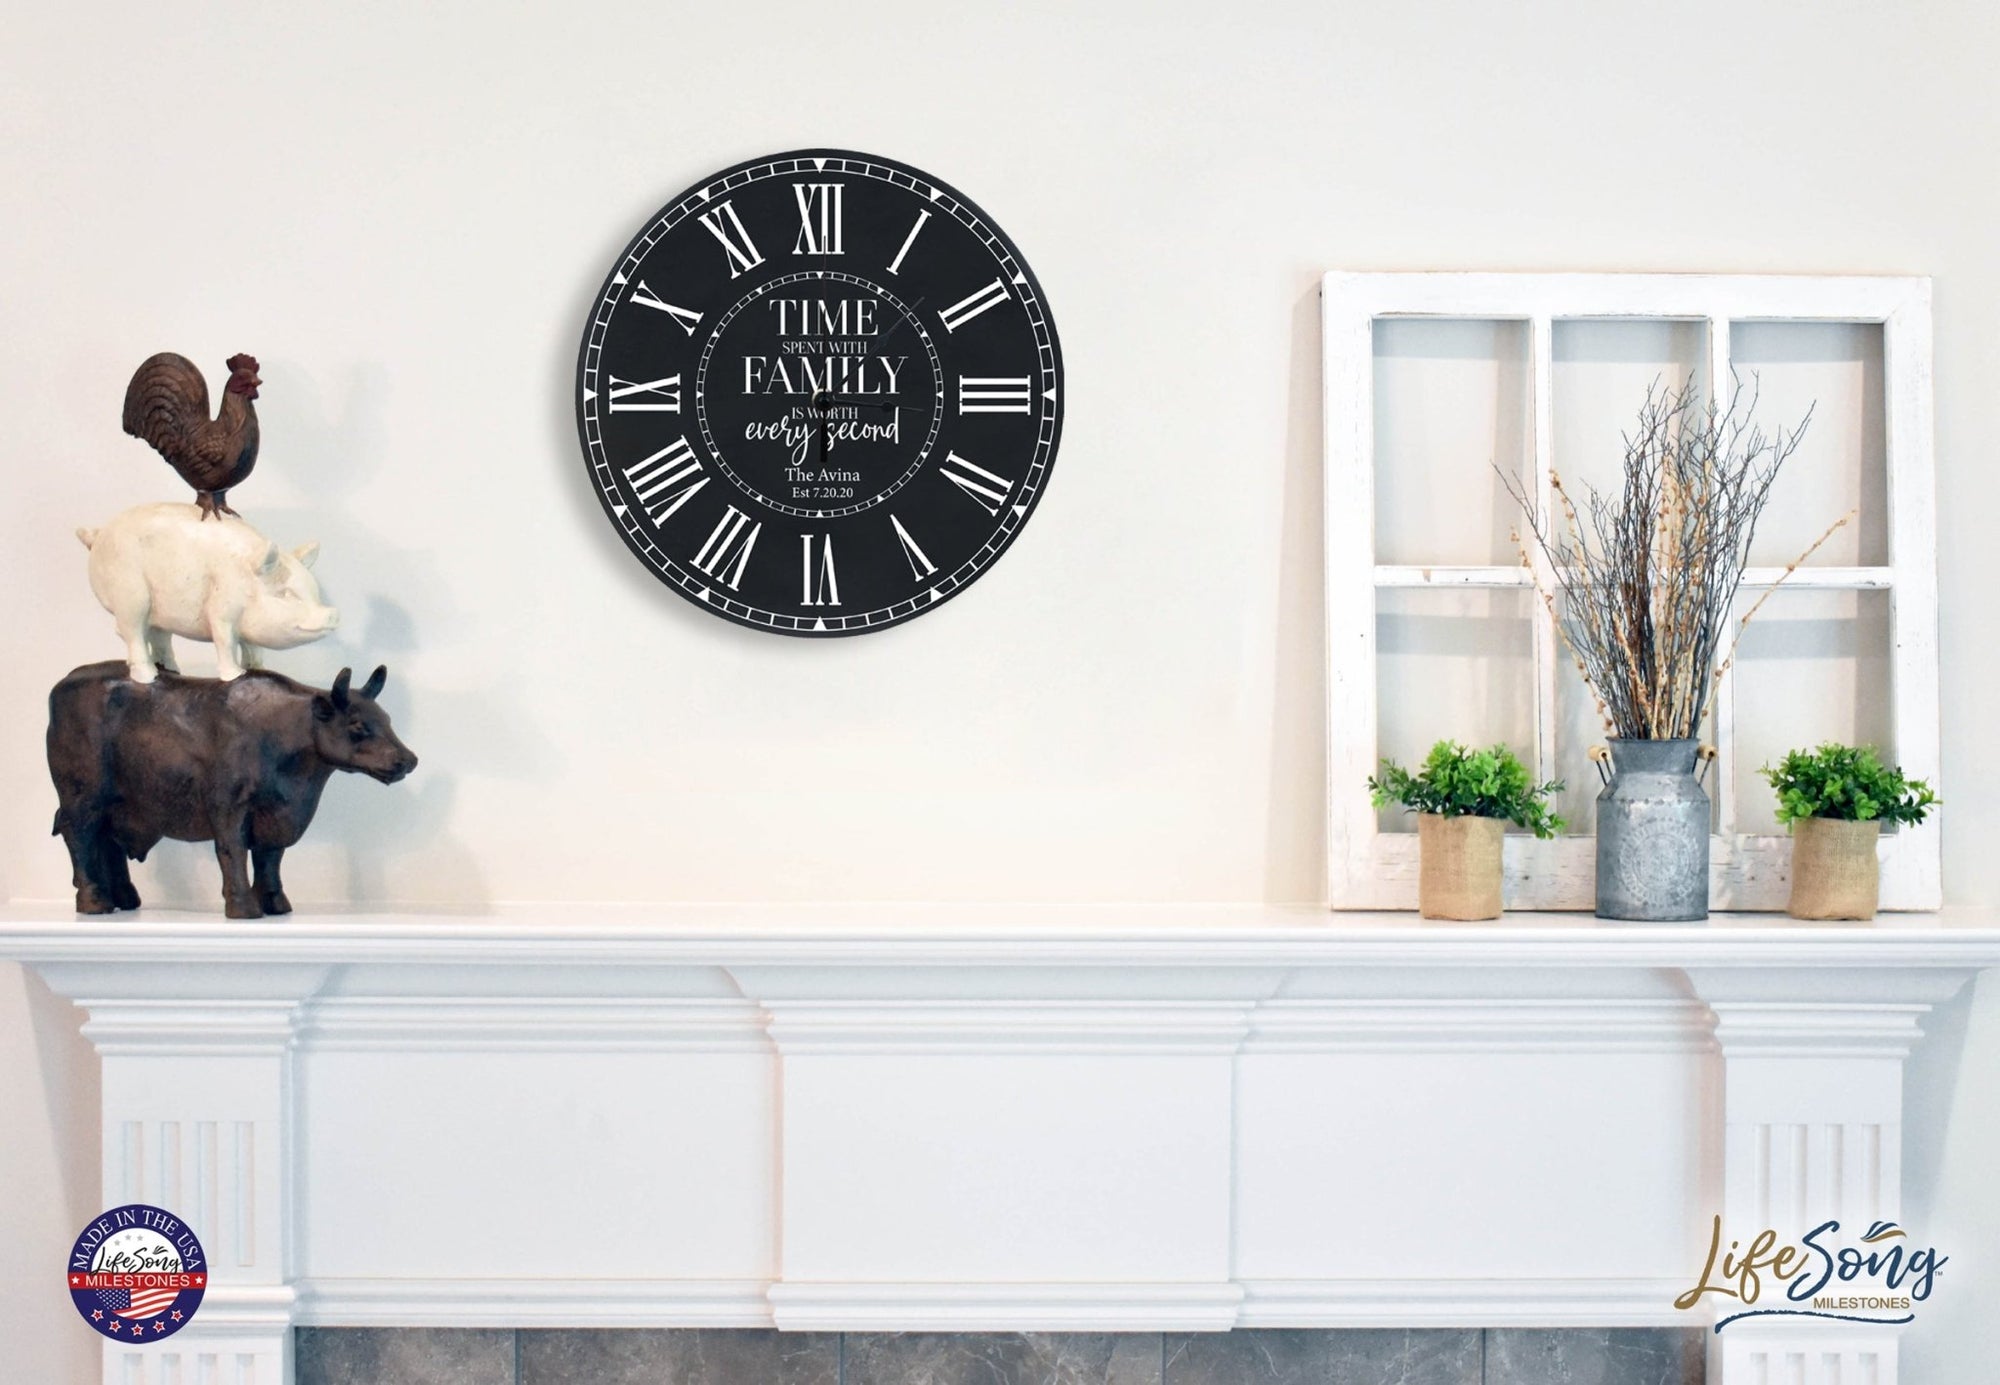 Personalized Inspirational Everyday Home and Family Wall Clock 12 x 12 x 0.75 - (The Family) - LifeSong Milestones